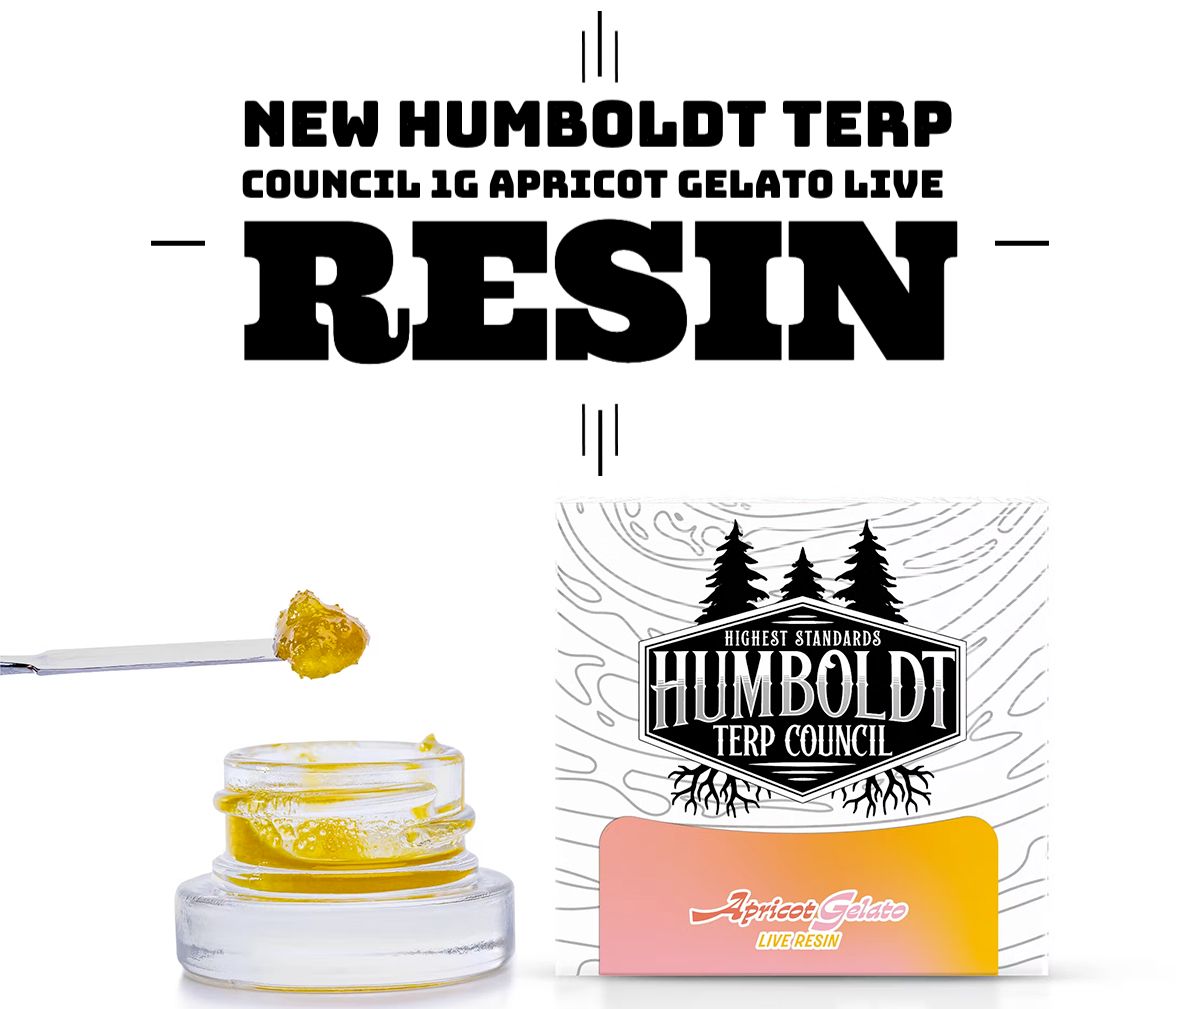 New Humboldt Terp Council 1g Apricot Gelato Live Resin